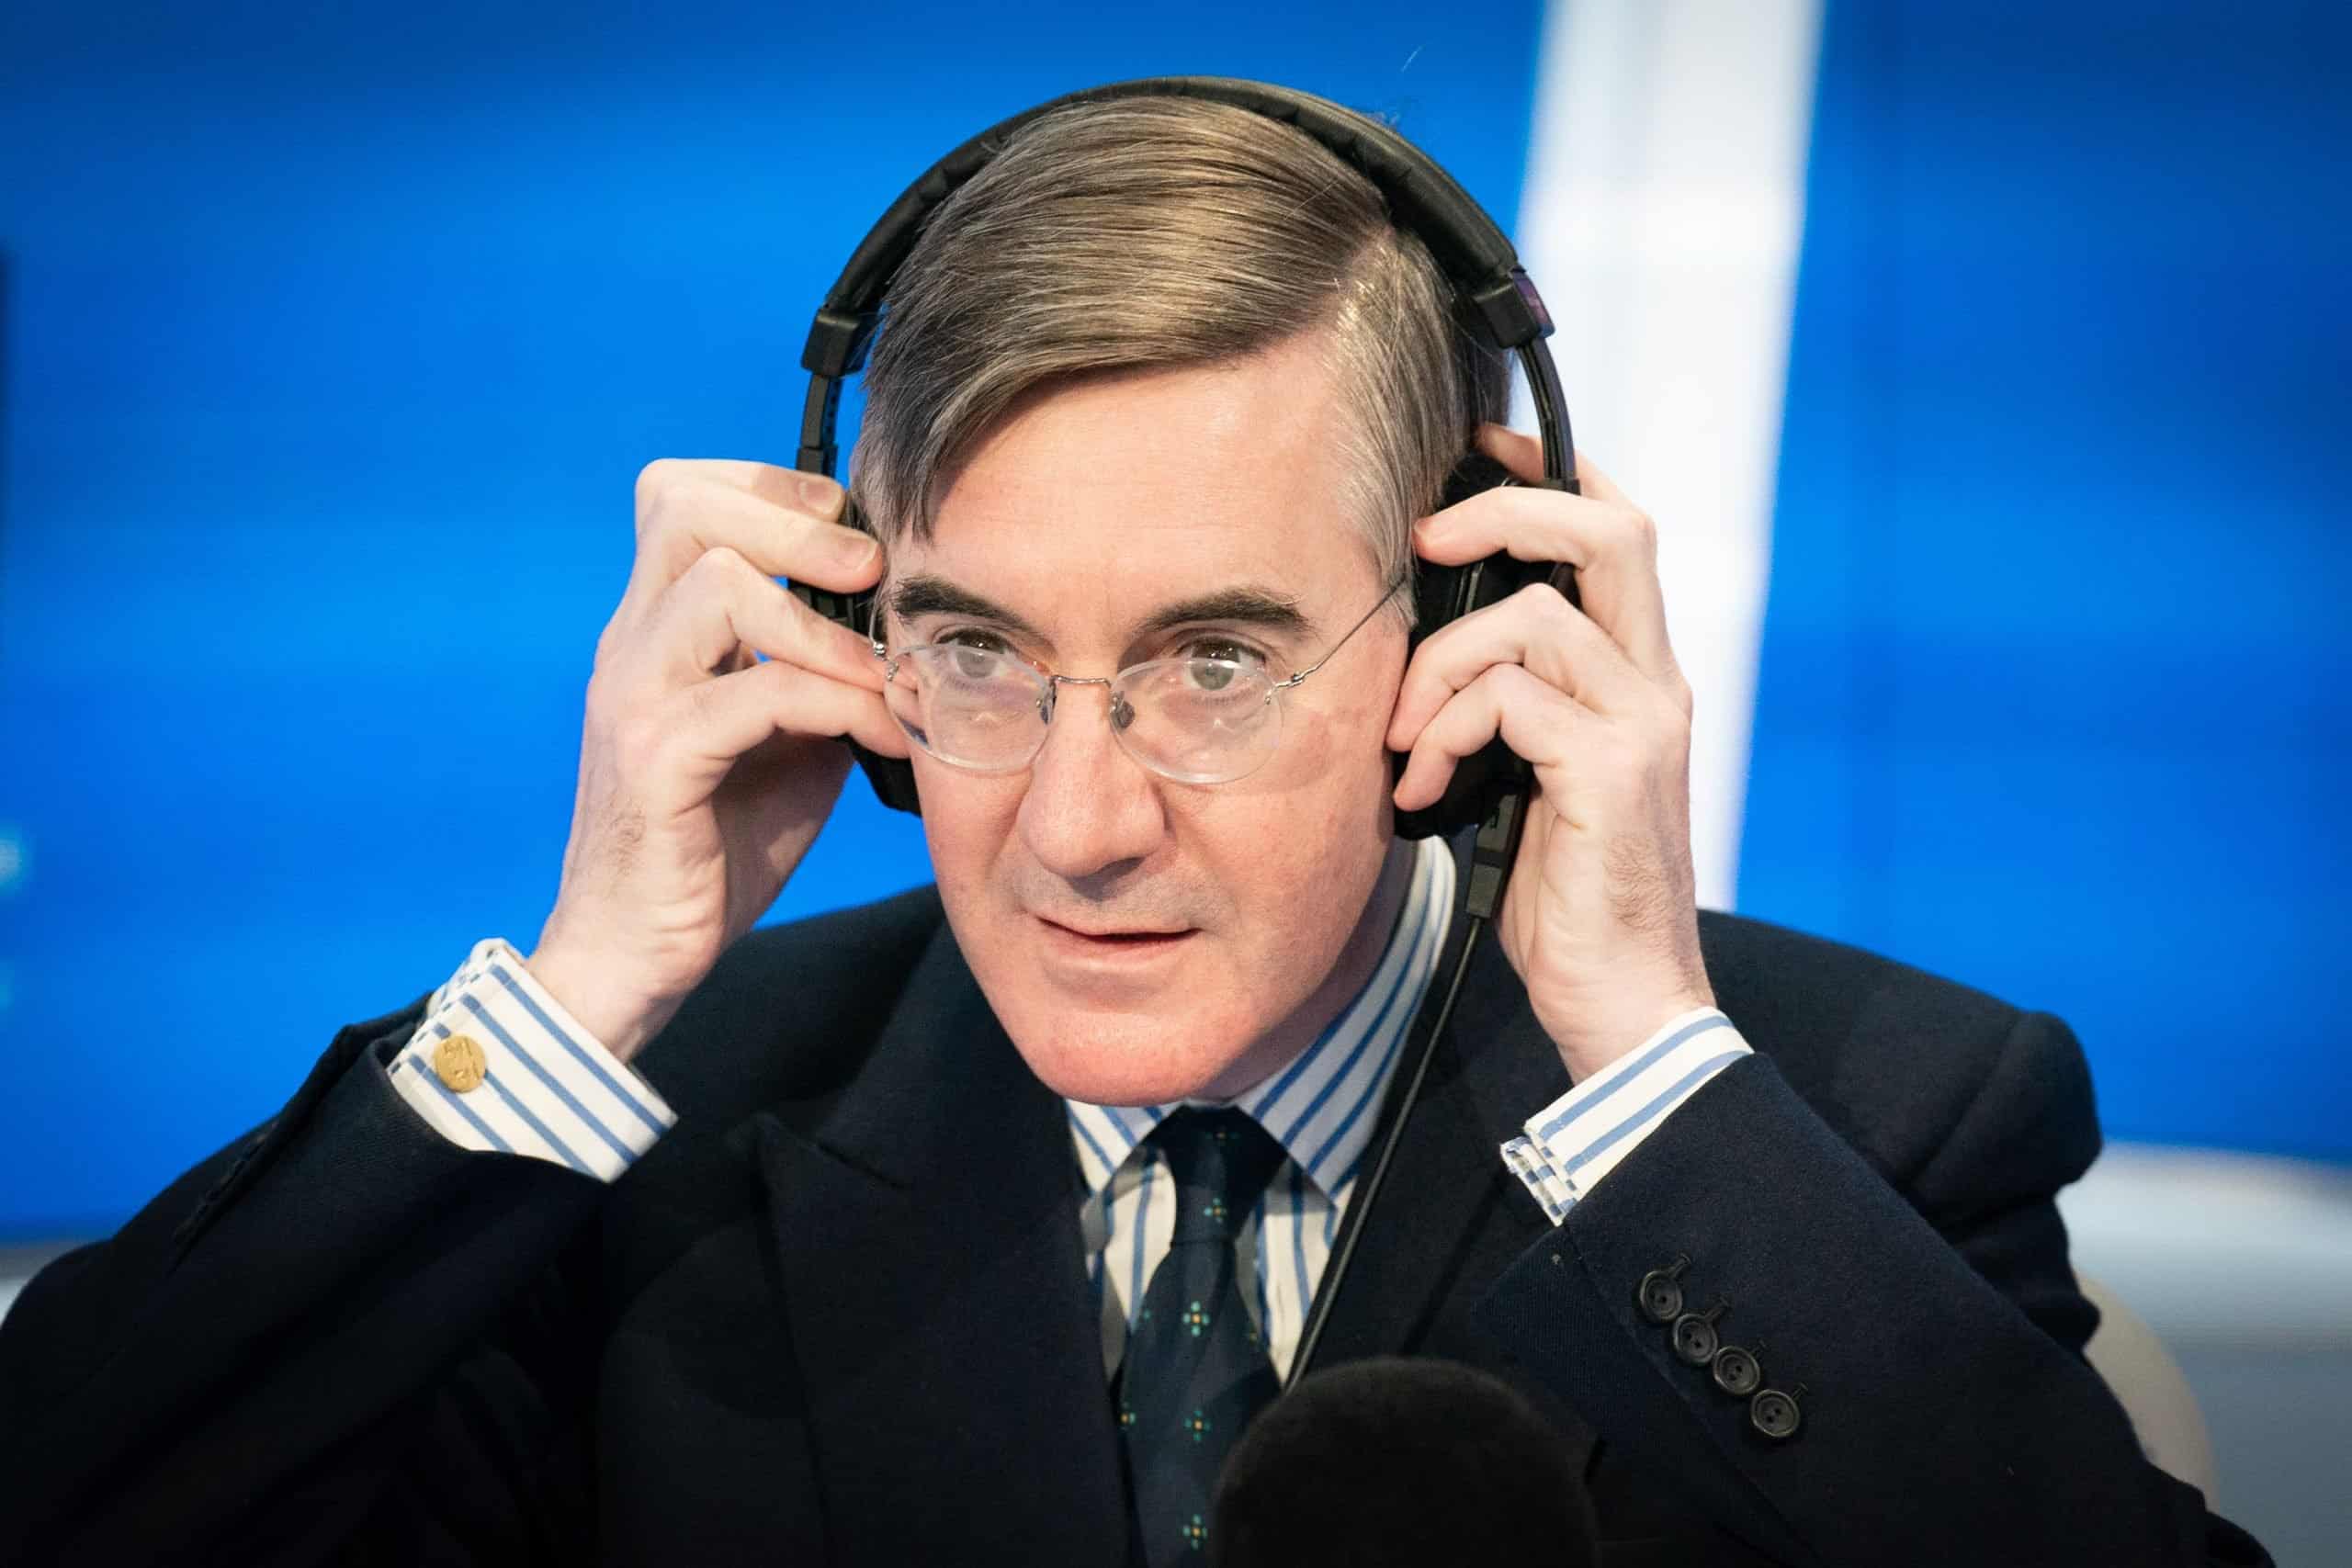 Watch: Rees-Mogg announces energy strategy will focus on extraction of fossil fuels